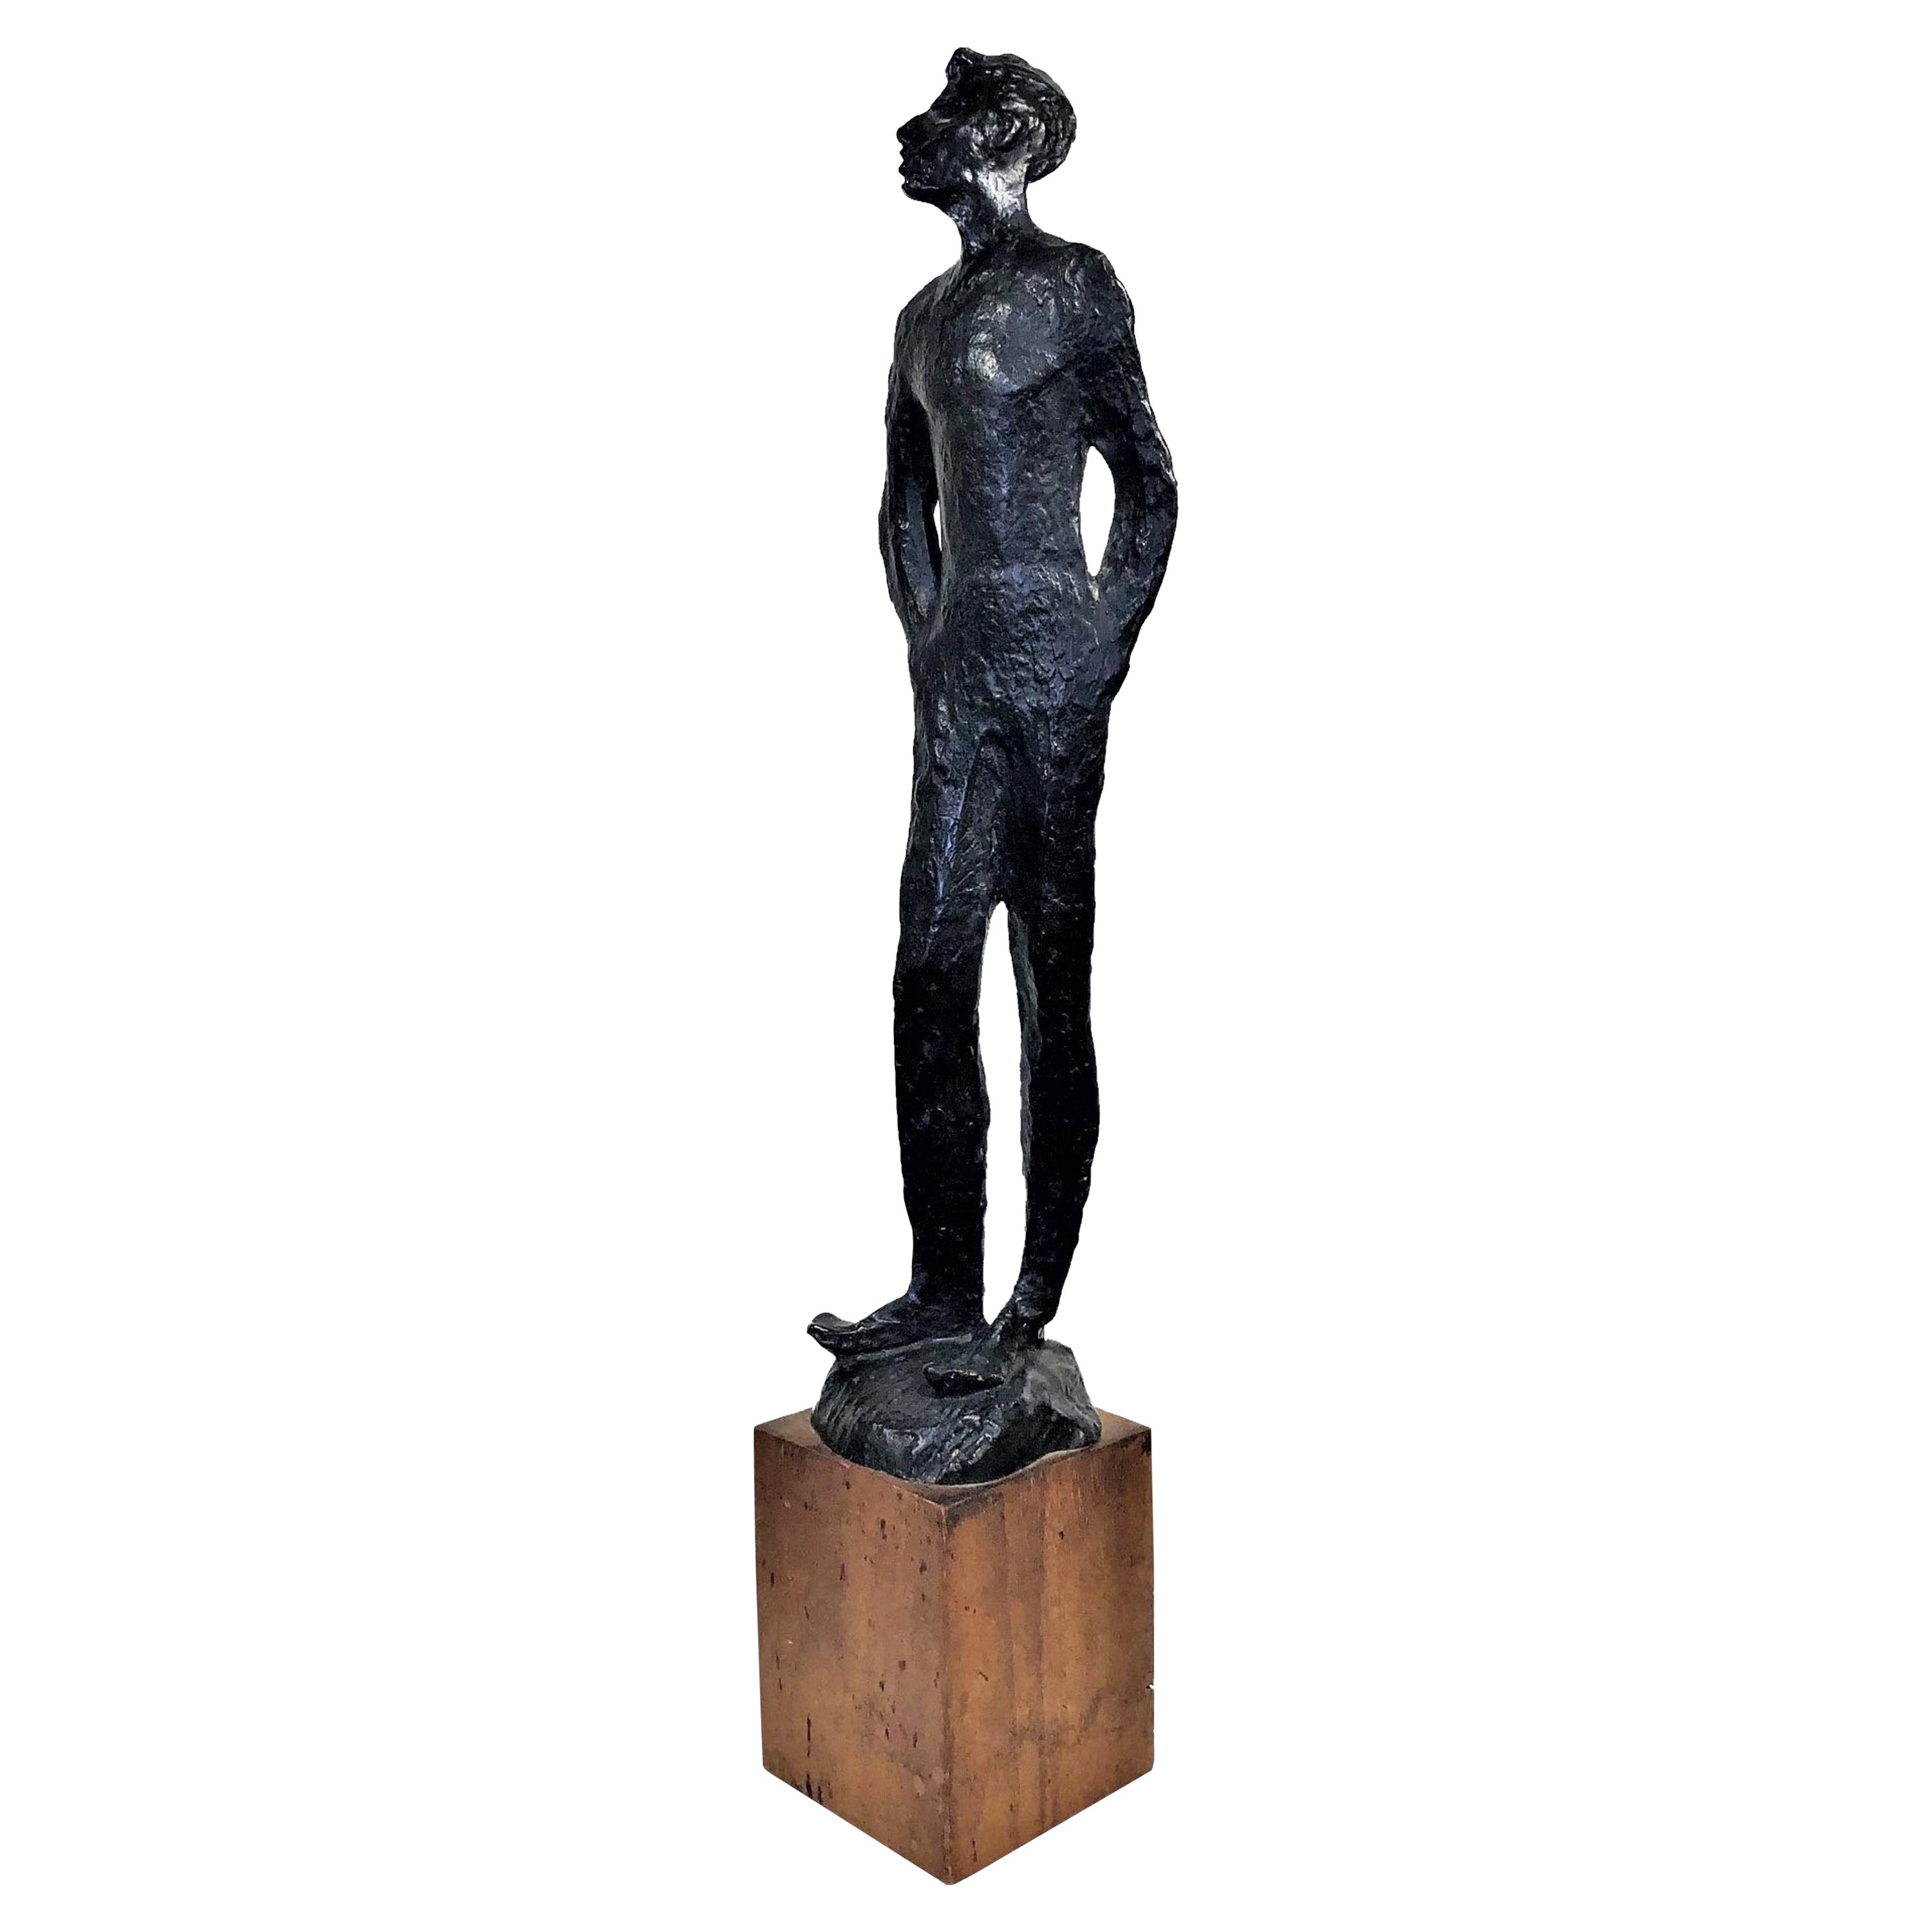 Modernist Bronze Sculpture of a Standing Man by L. Shore, 1953 For Sale